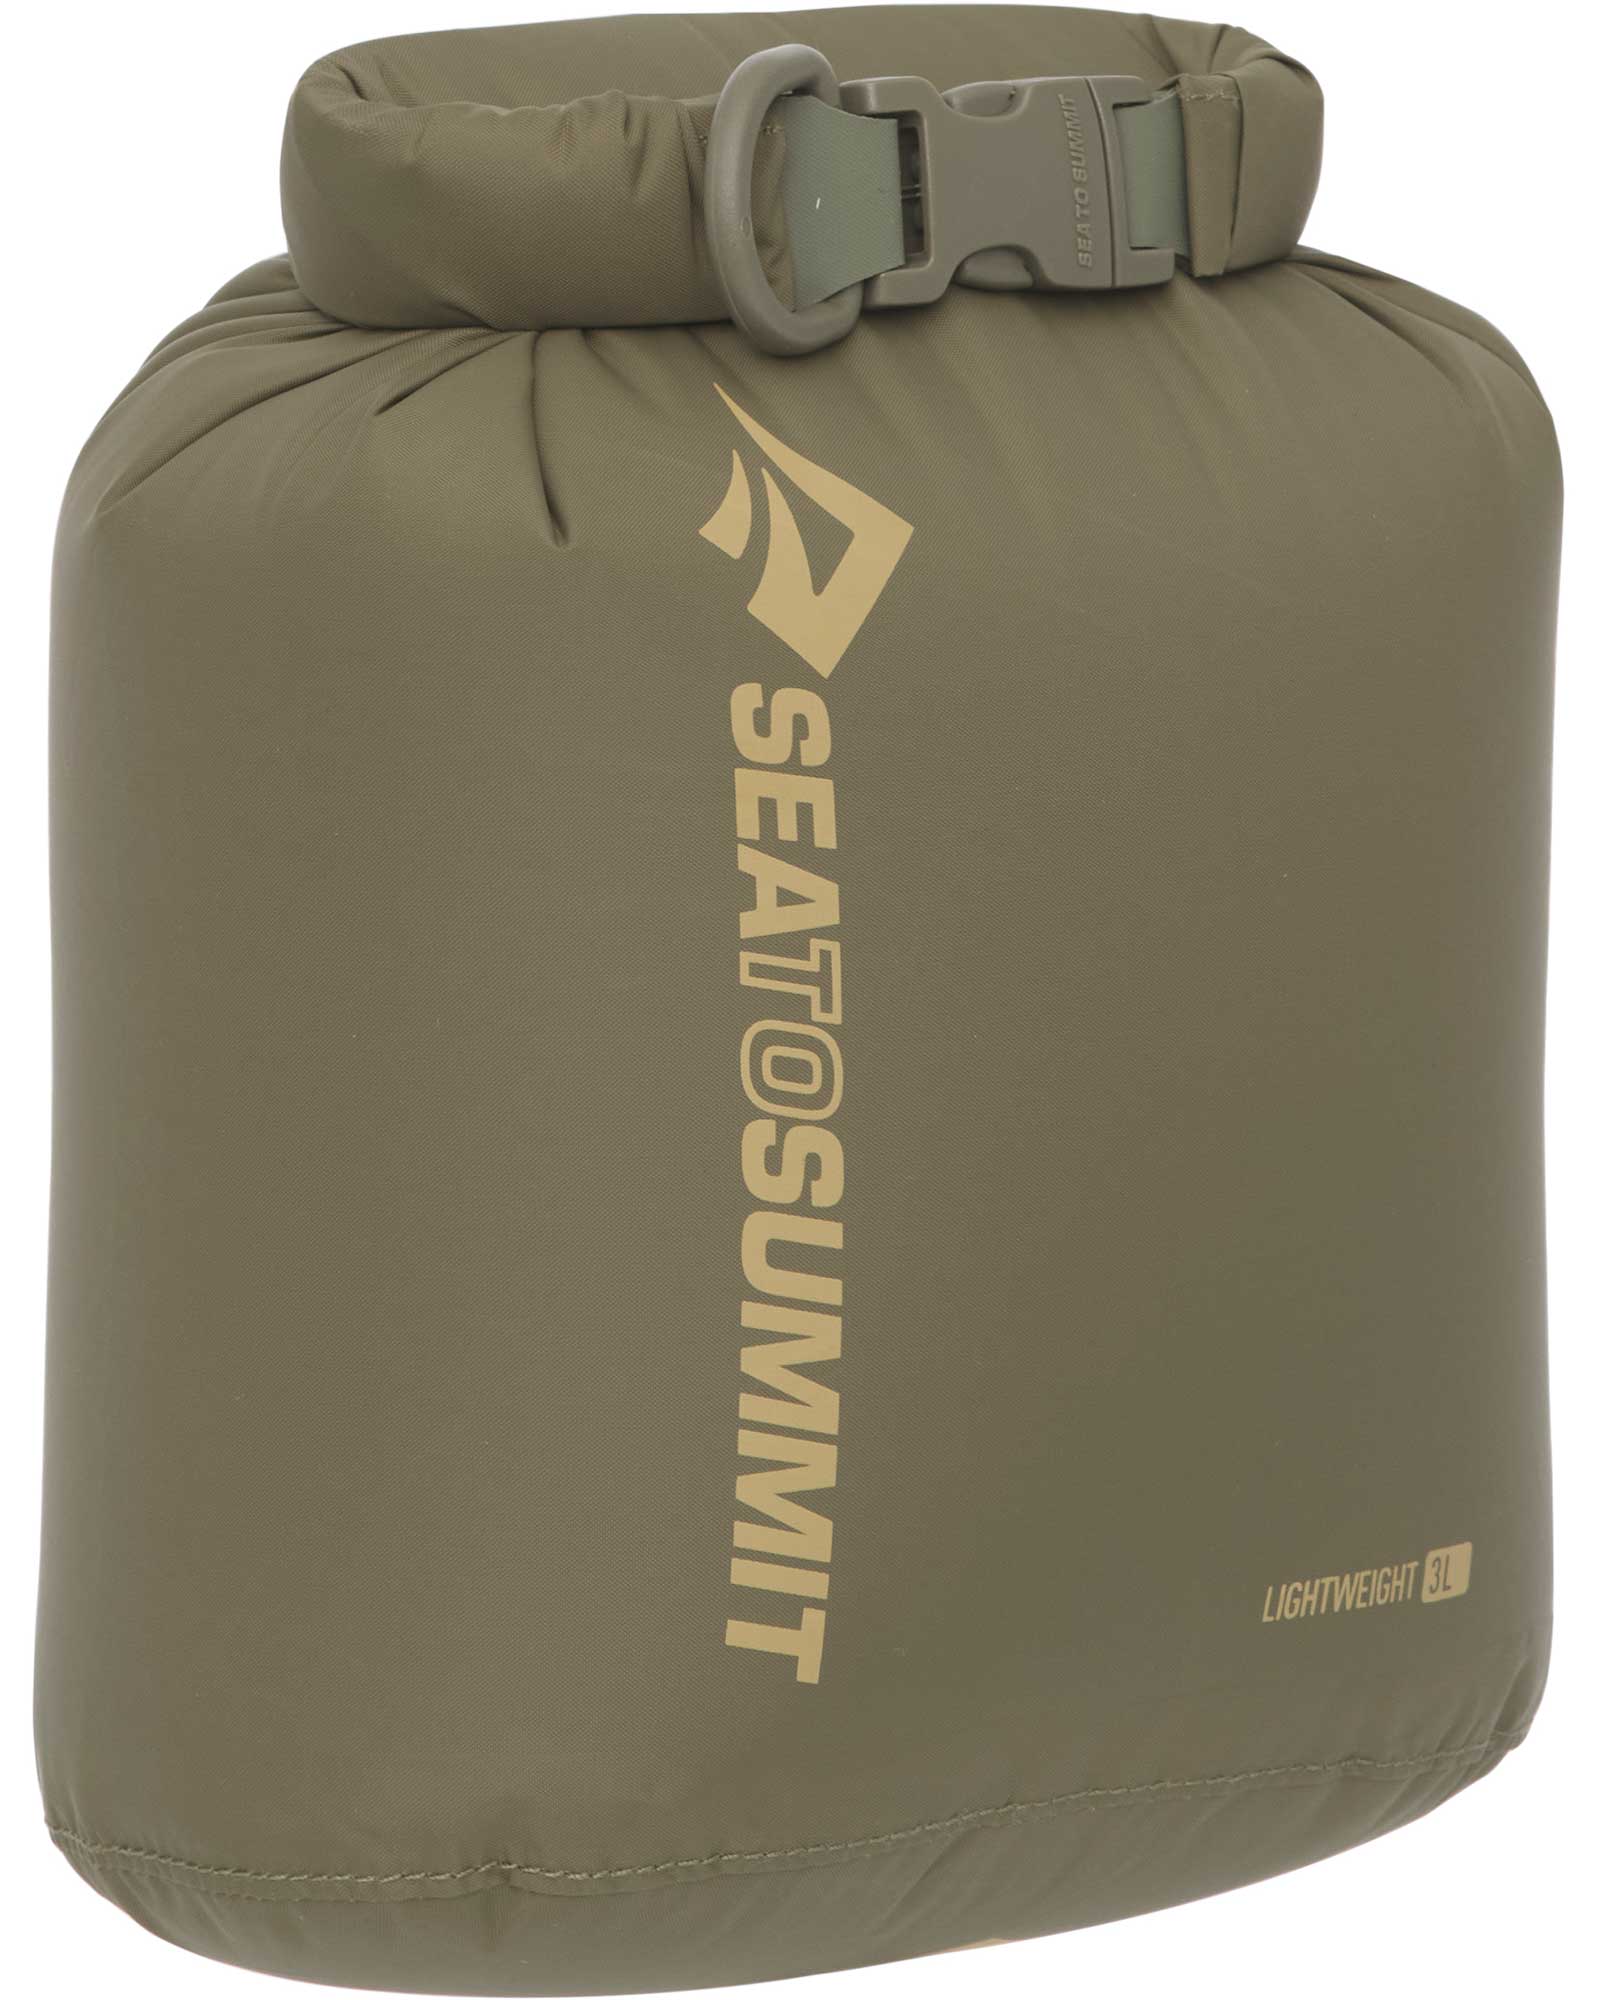 Sea To Summit Lightweight Dry Bag 3l Dry Bags